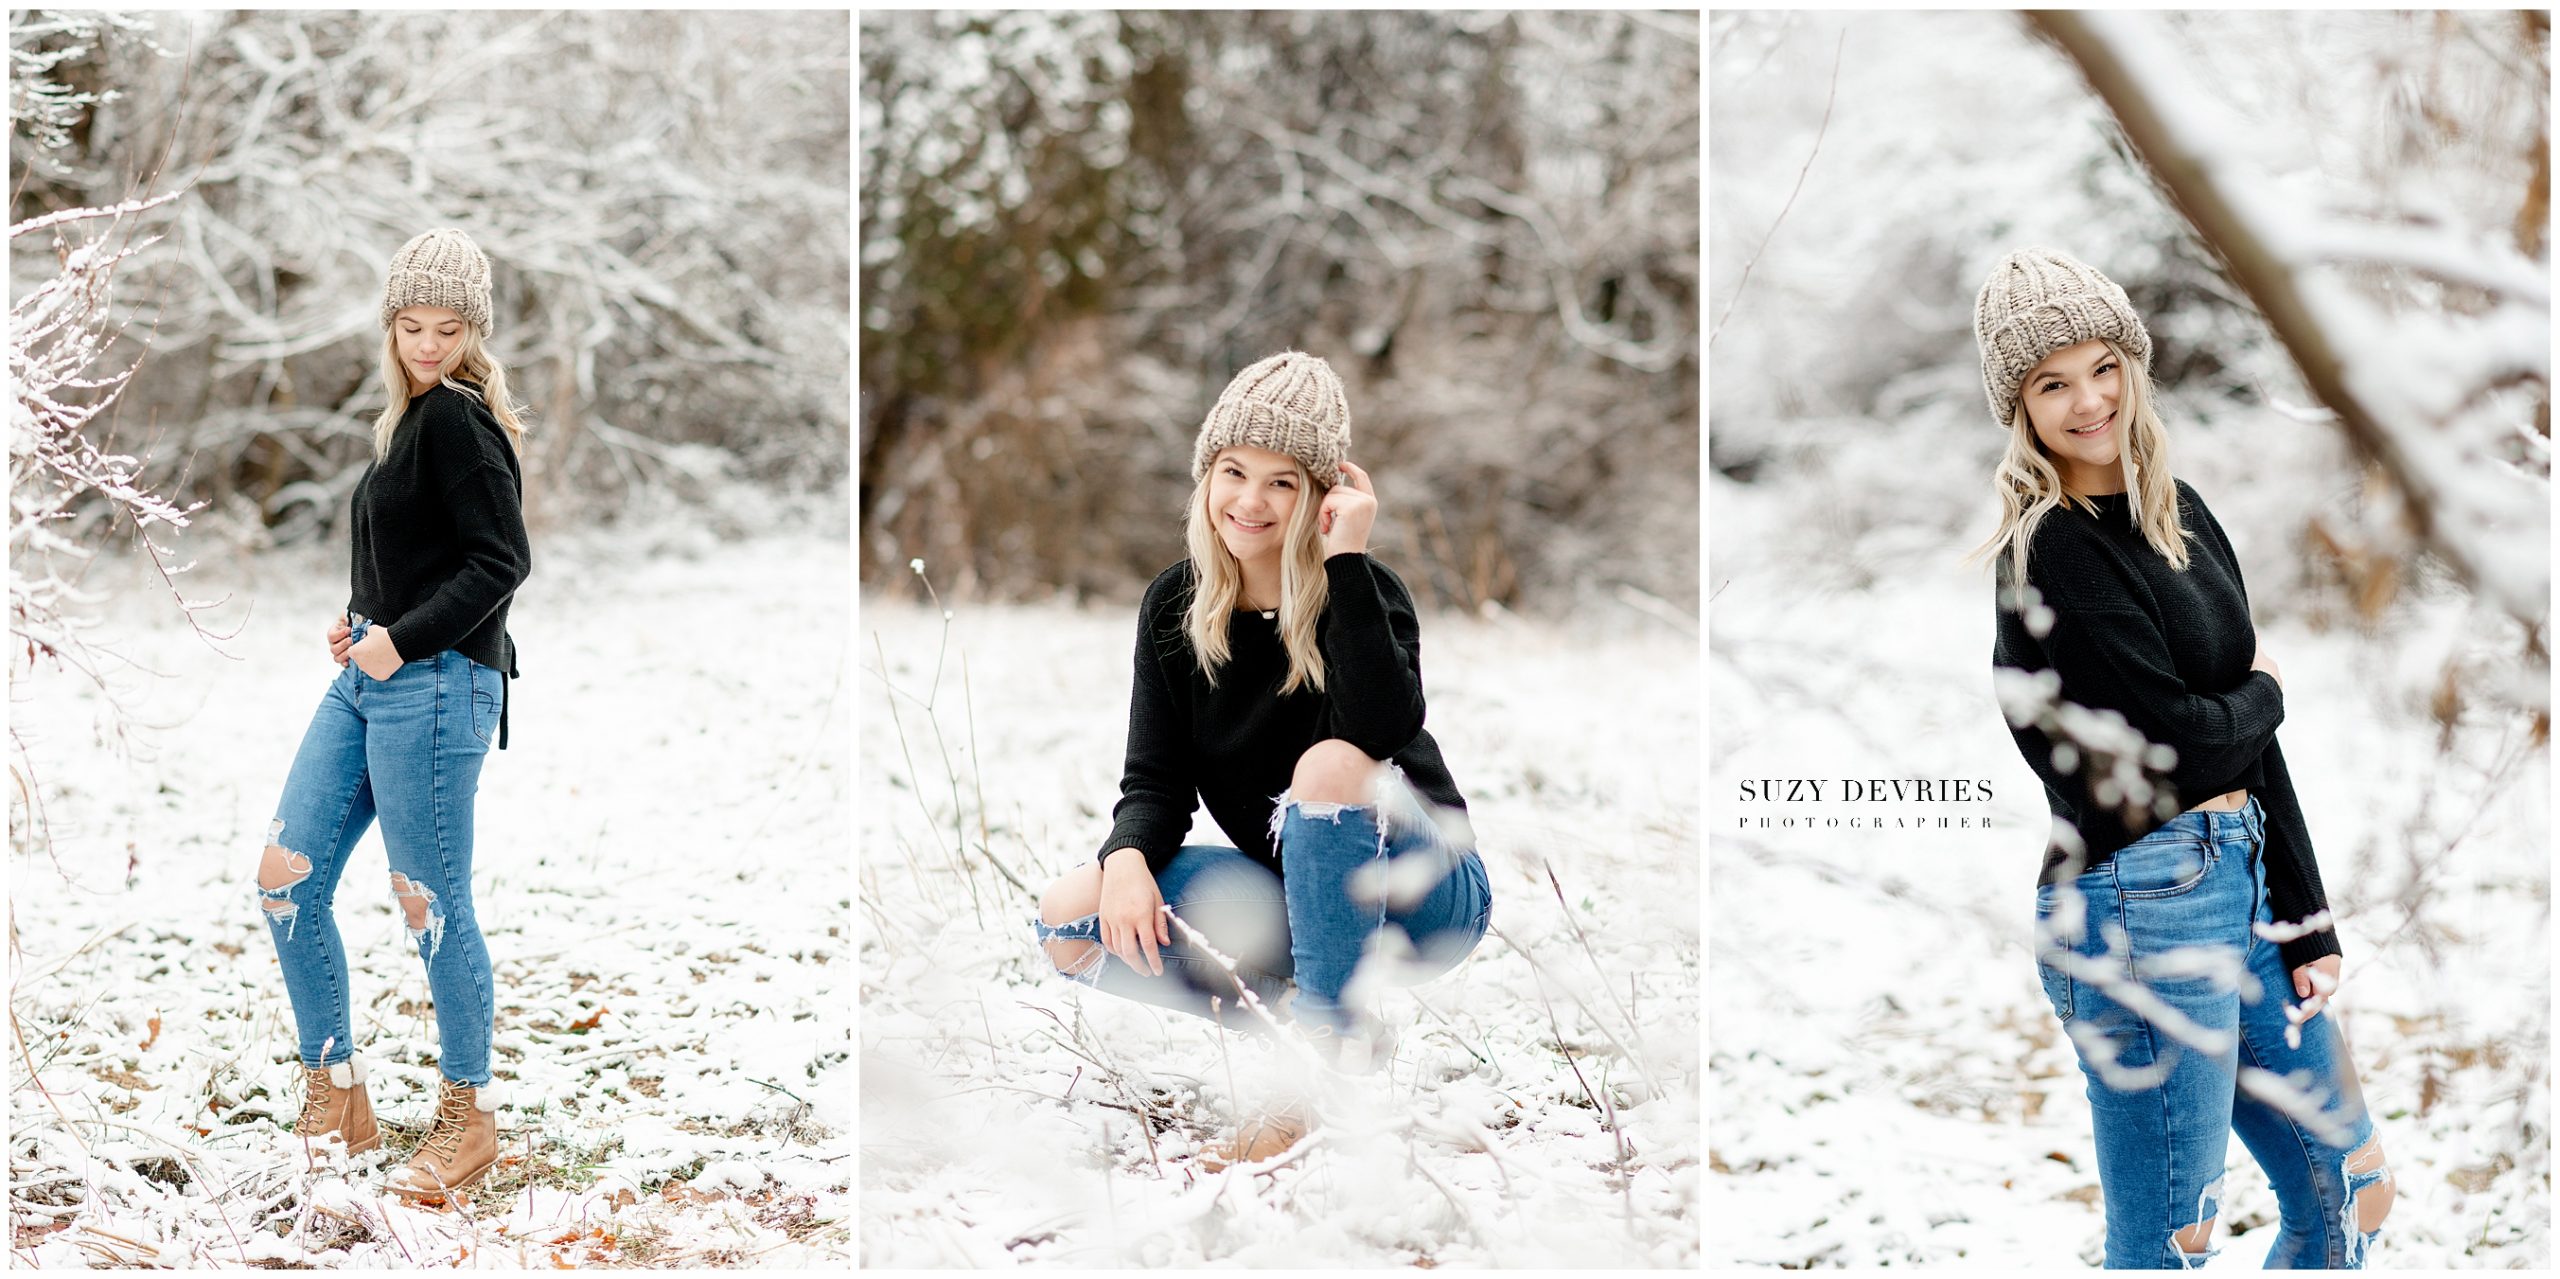 Edwardsville High School Senior girl in the snow wearing a black coat and tan hat.